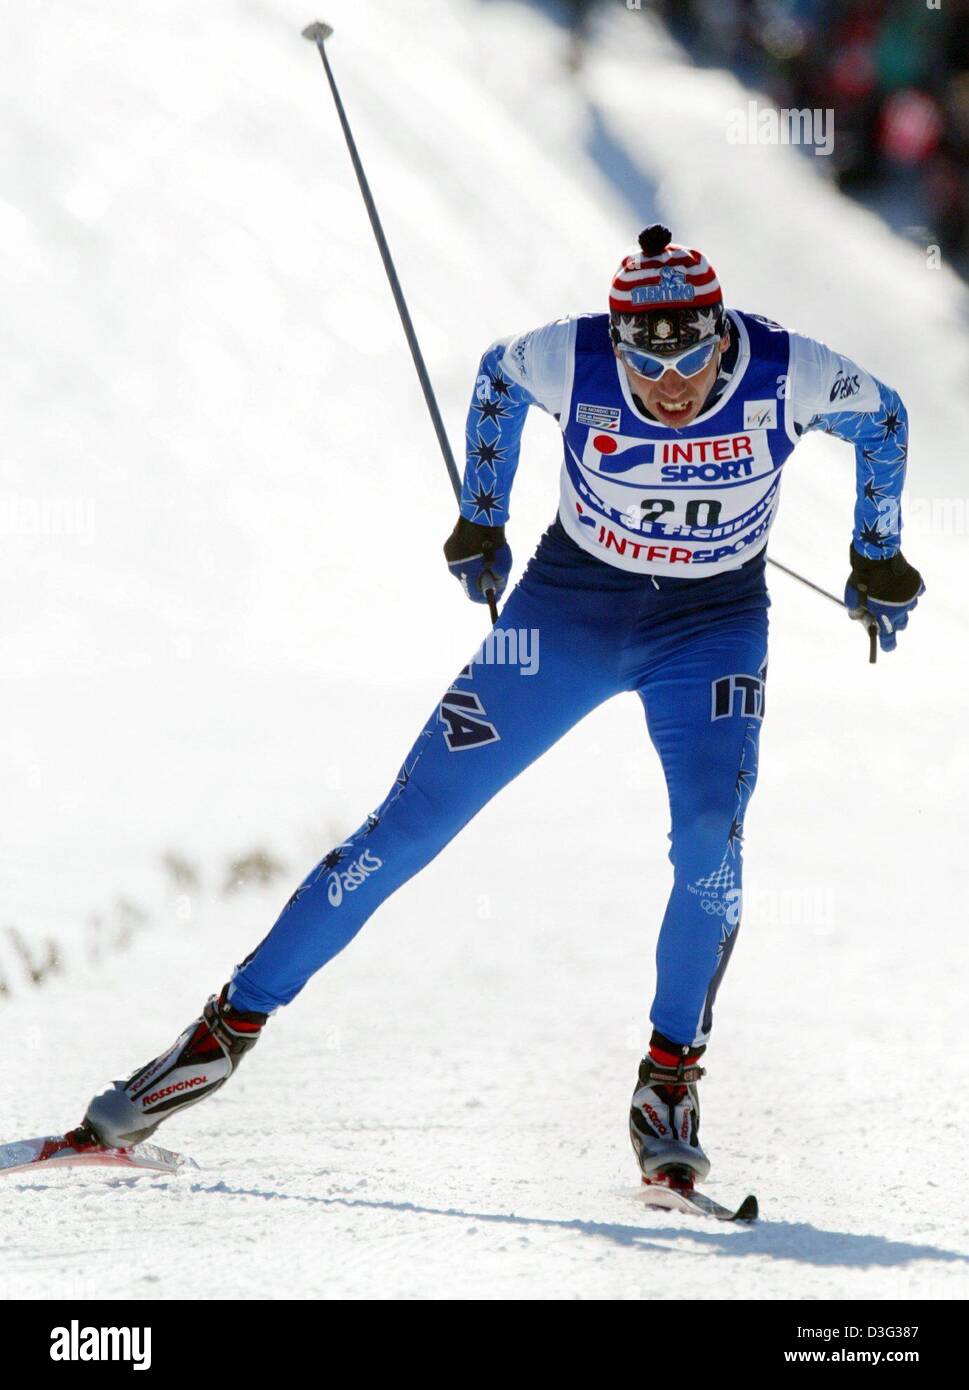 (dpa) - Italian skier Cristian Zorzi races during the qualification training for the 1.5 km sprint event of the nordic skiing world championships in Tesero in the Val di Fiemme, Italy, 26 February 2003. He finished first in the training, but made only eighth place in the competition run. Stock Photo